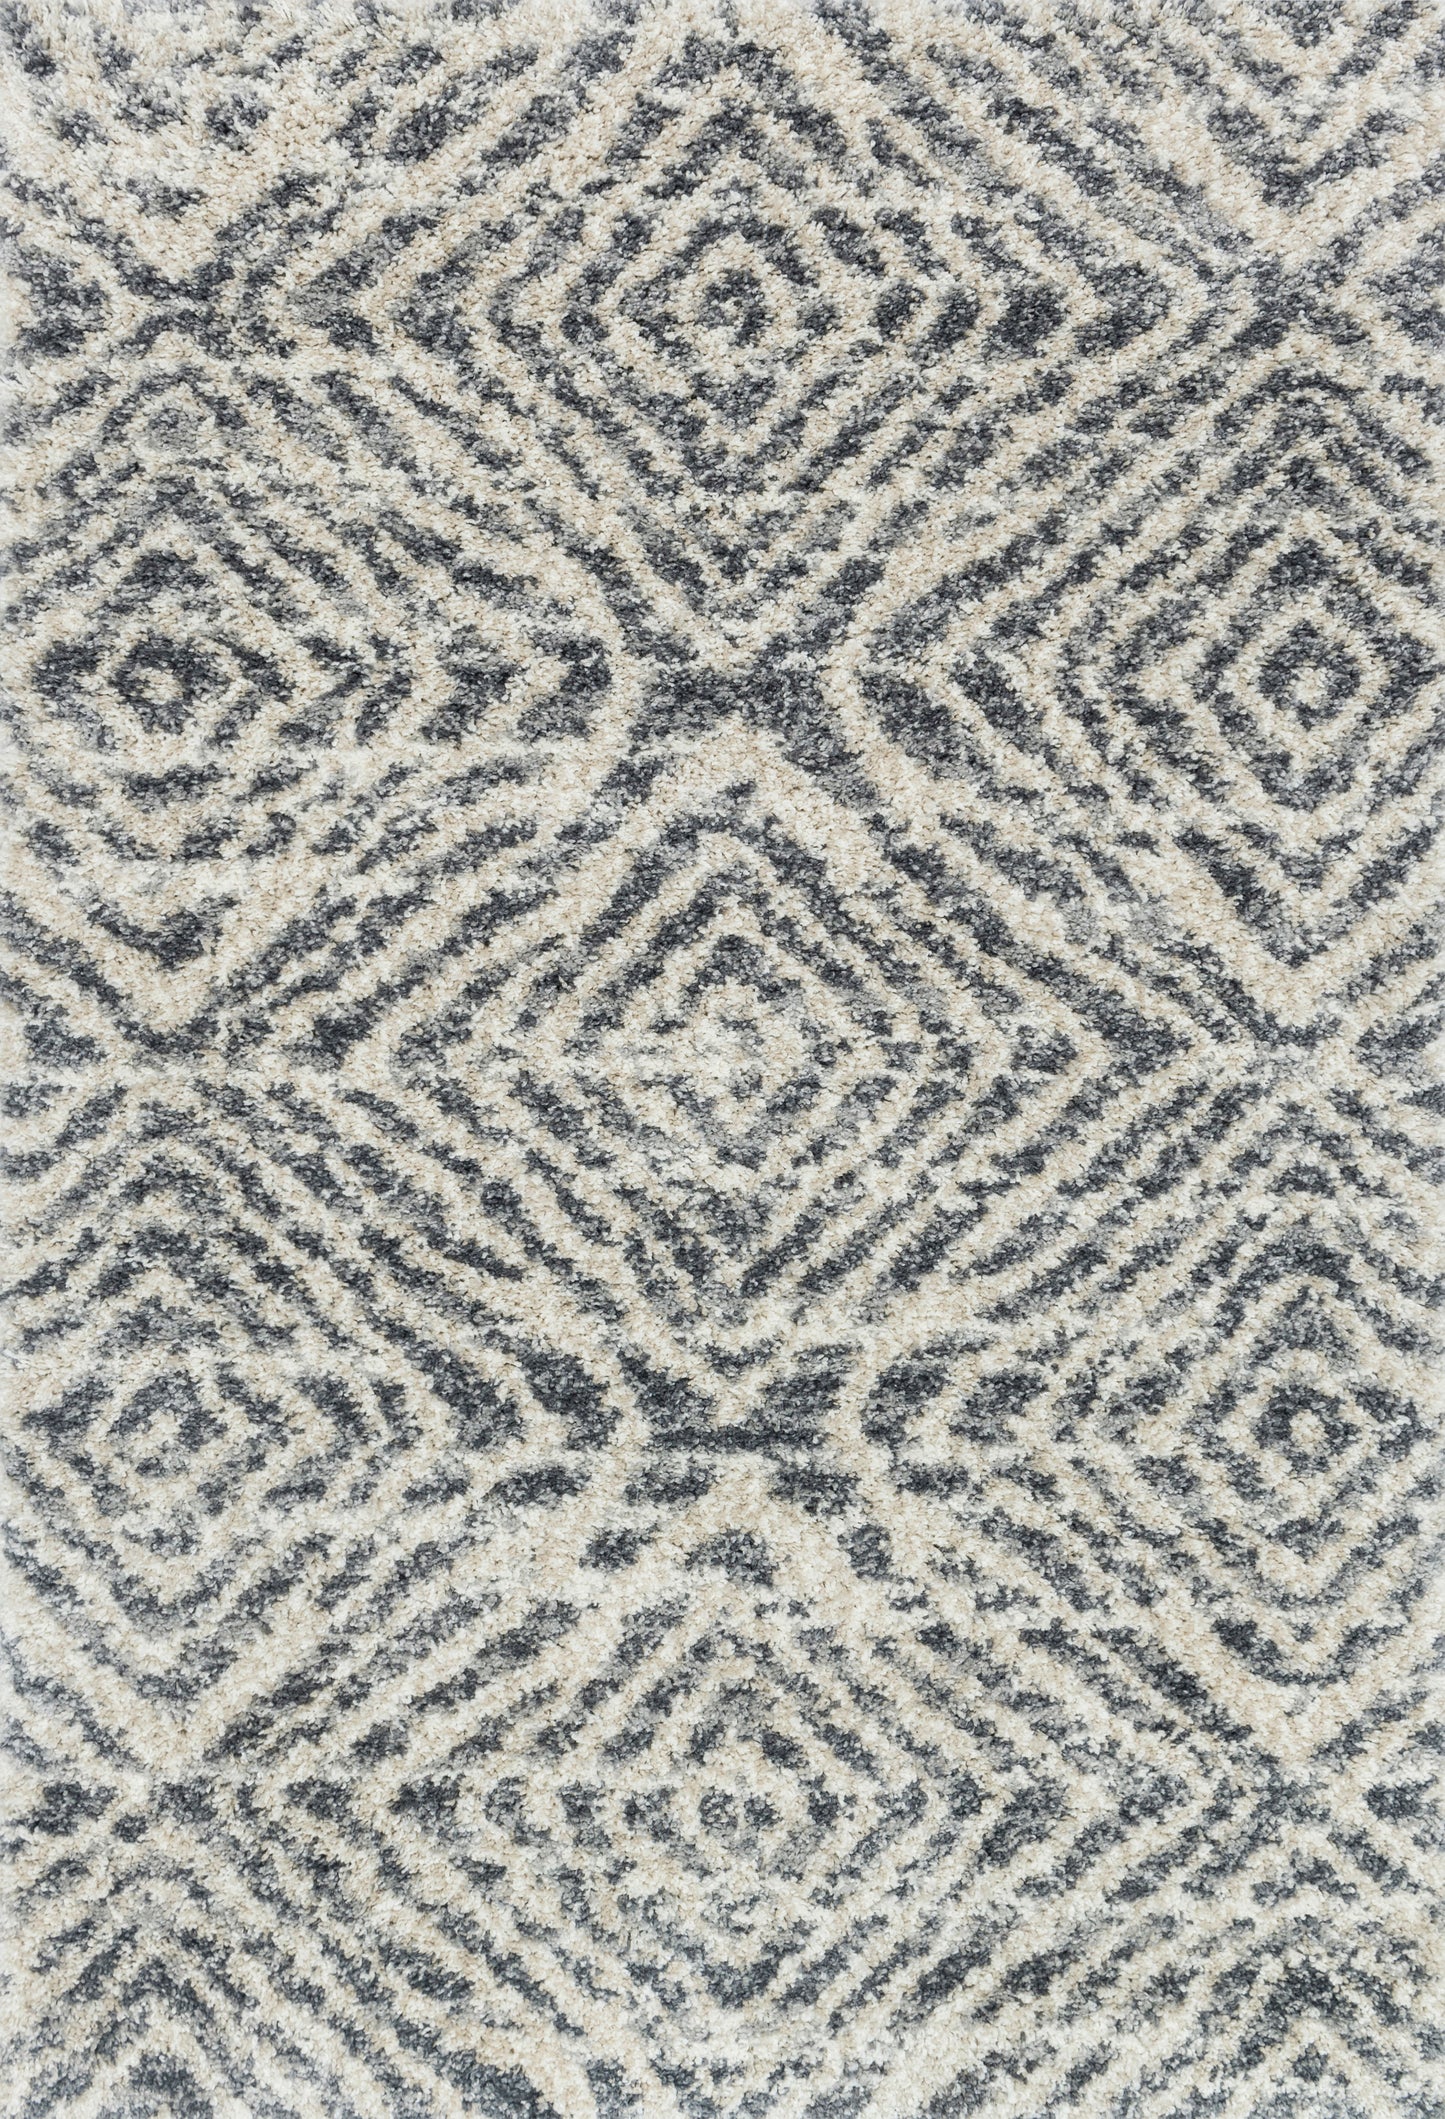 A picture of Loloi's Quincy rug, in style QC-01, color Graphite / Sand